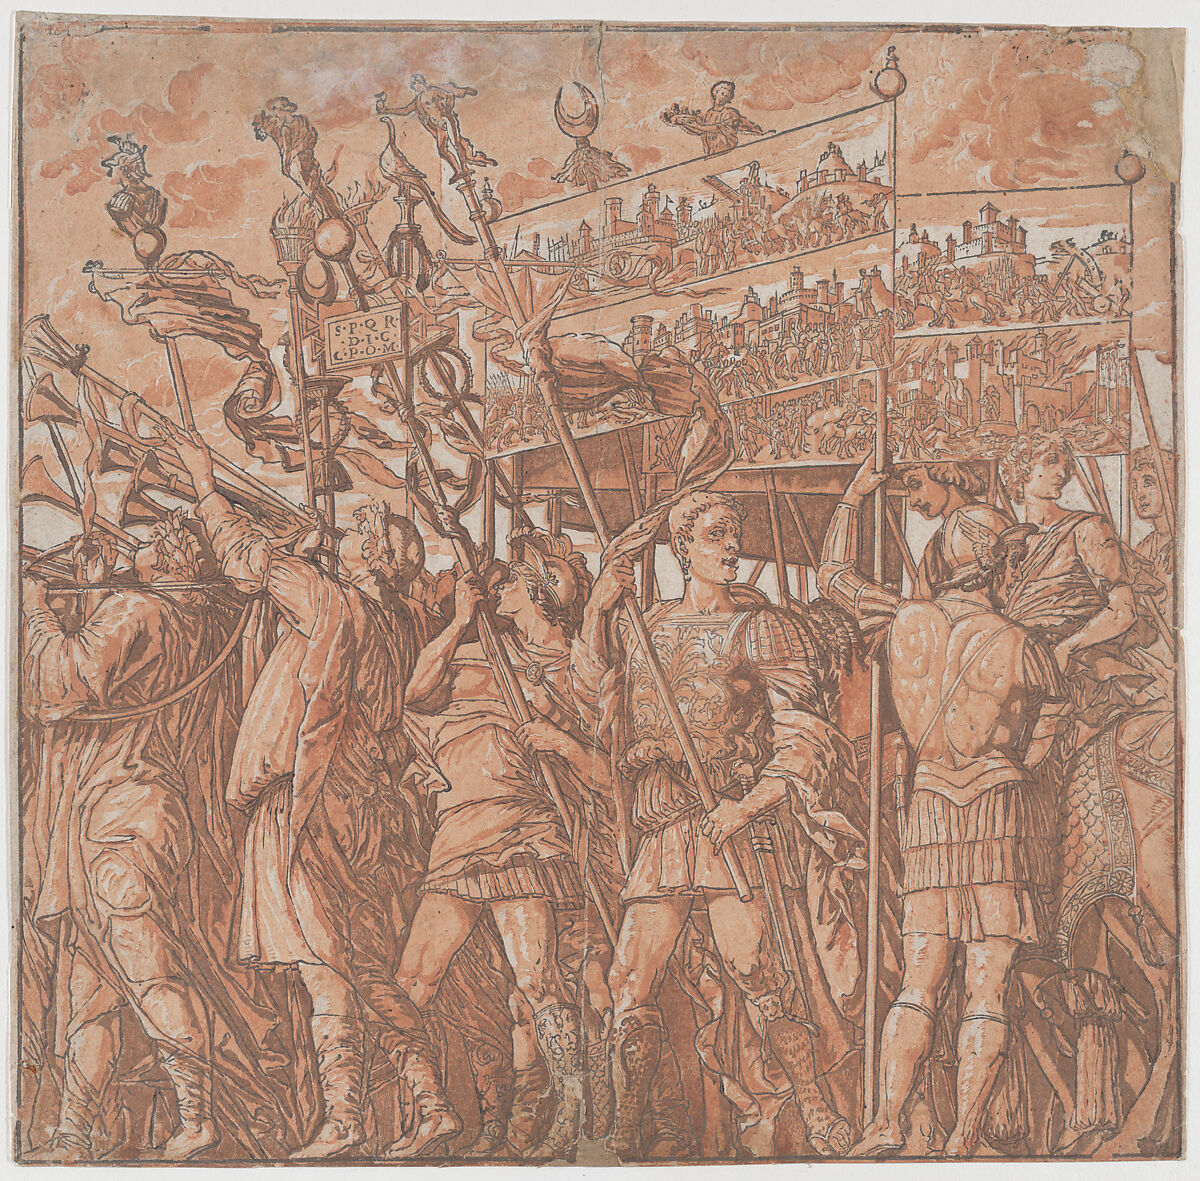 Sheet 1: Roman soldiers carrying banners depicting the triumphant victories of Julius Caesar, from "The Triumph of Julius Caesar", Andrea Andreani (Italian, Mantua 1558/1559–1629), Chiaroscuro woodcut from four blocks printed in pink 